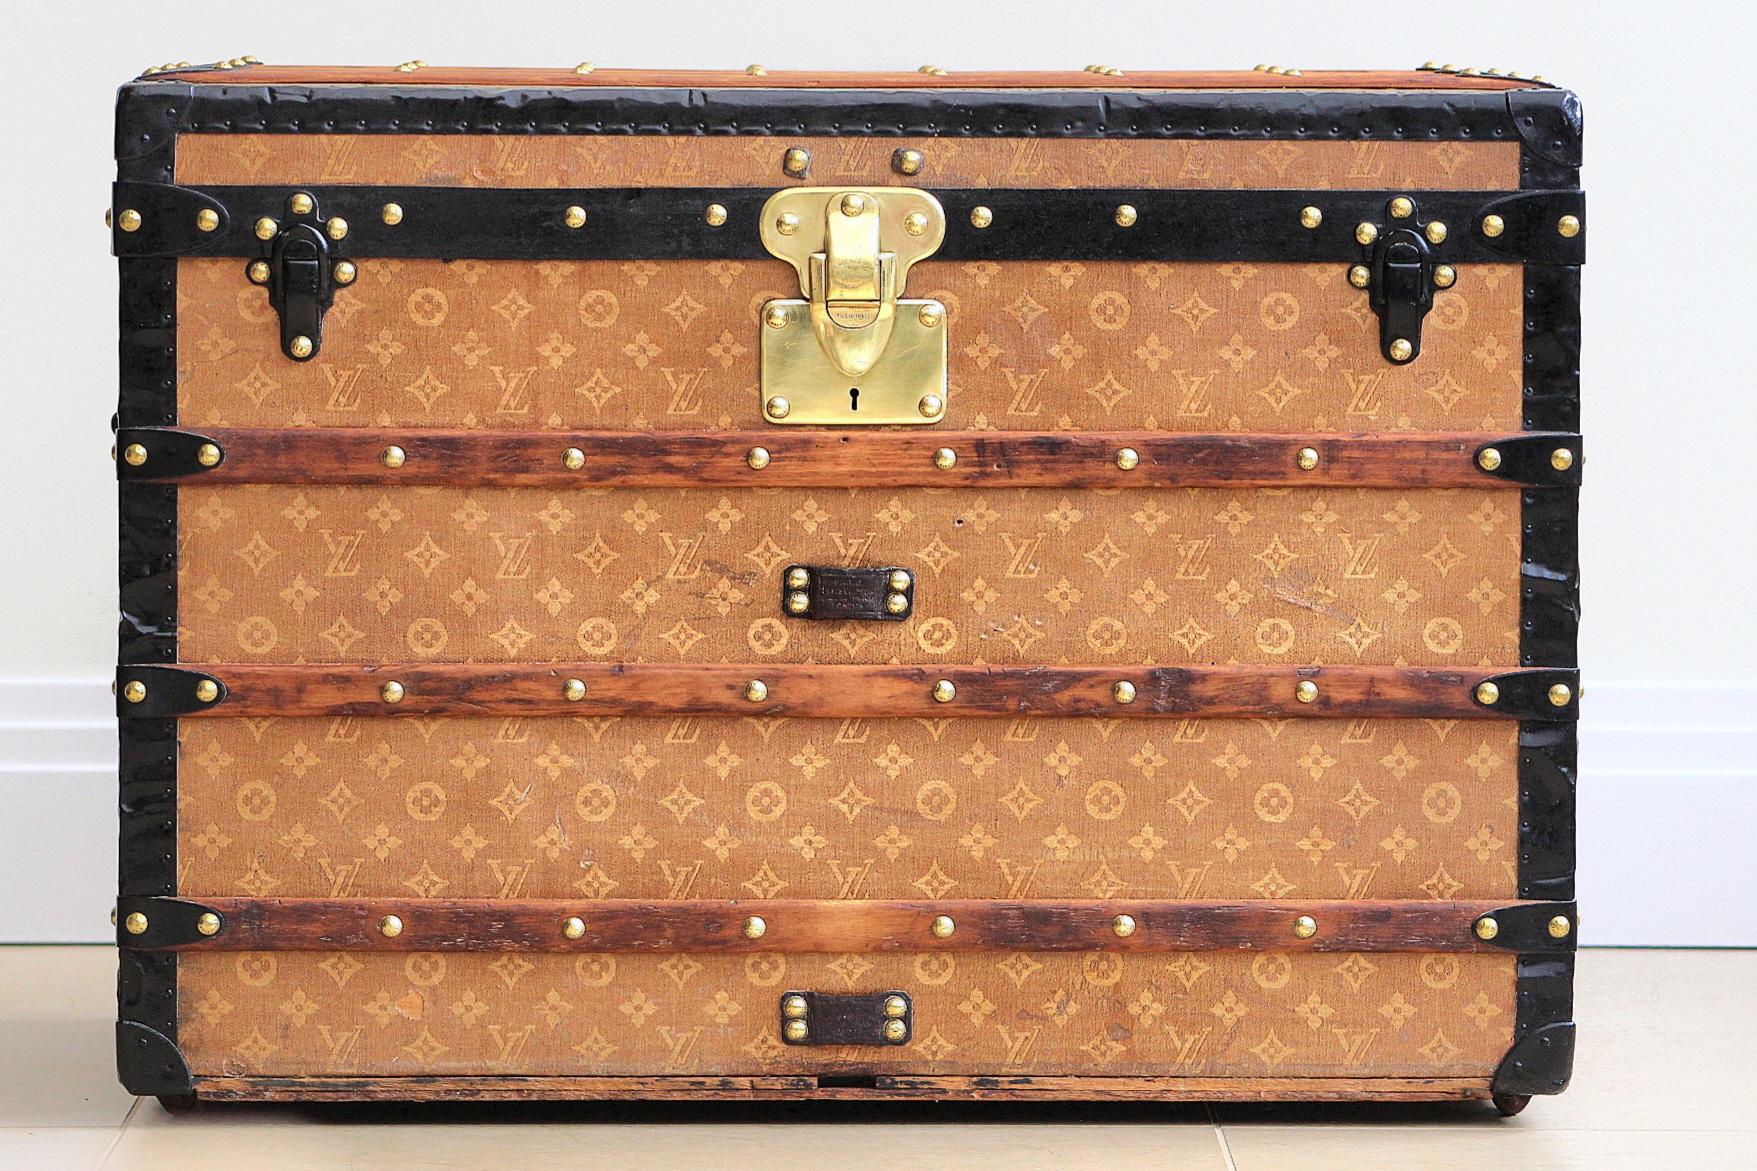 Step into a realm of timeless elegance with this exquisite Louis Vuitton Courier Trunk, a magnificent relic from the 1890s that encapsulates the essence of luxurious travel and refined craftsmanship. This distinguished piece is a testament to the